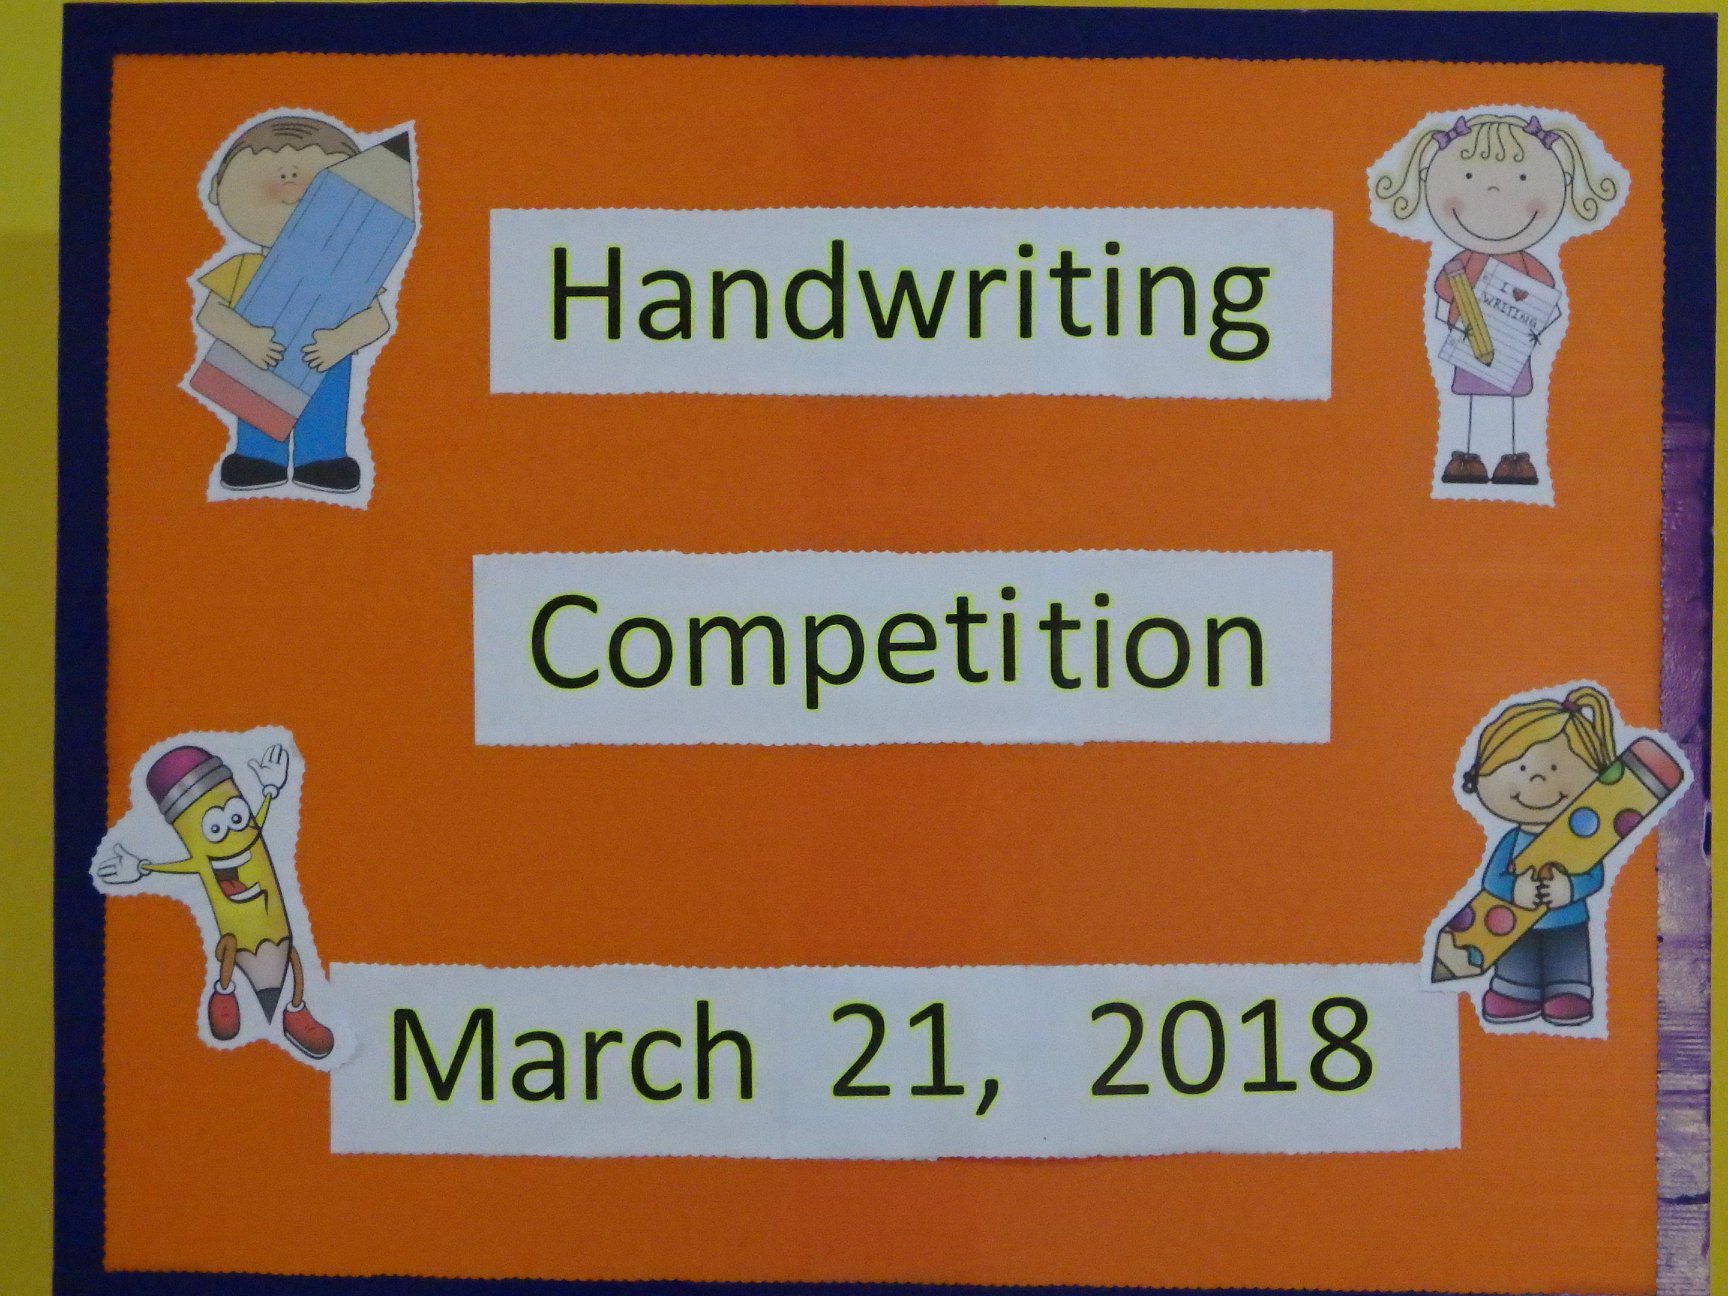 EYFS Hand writing Competition